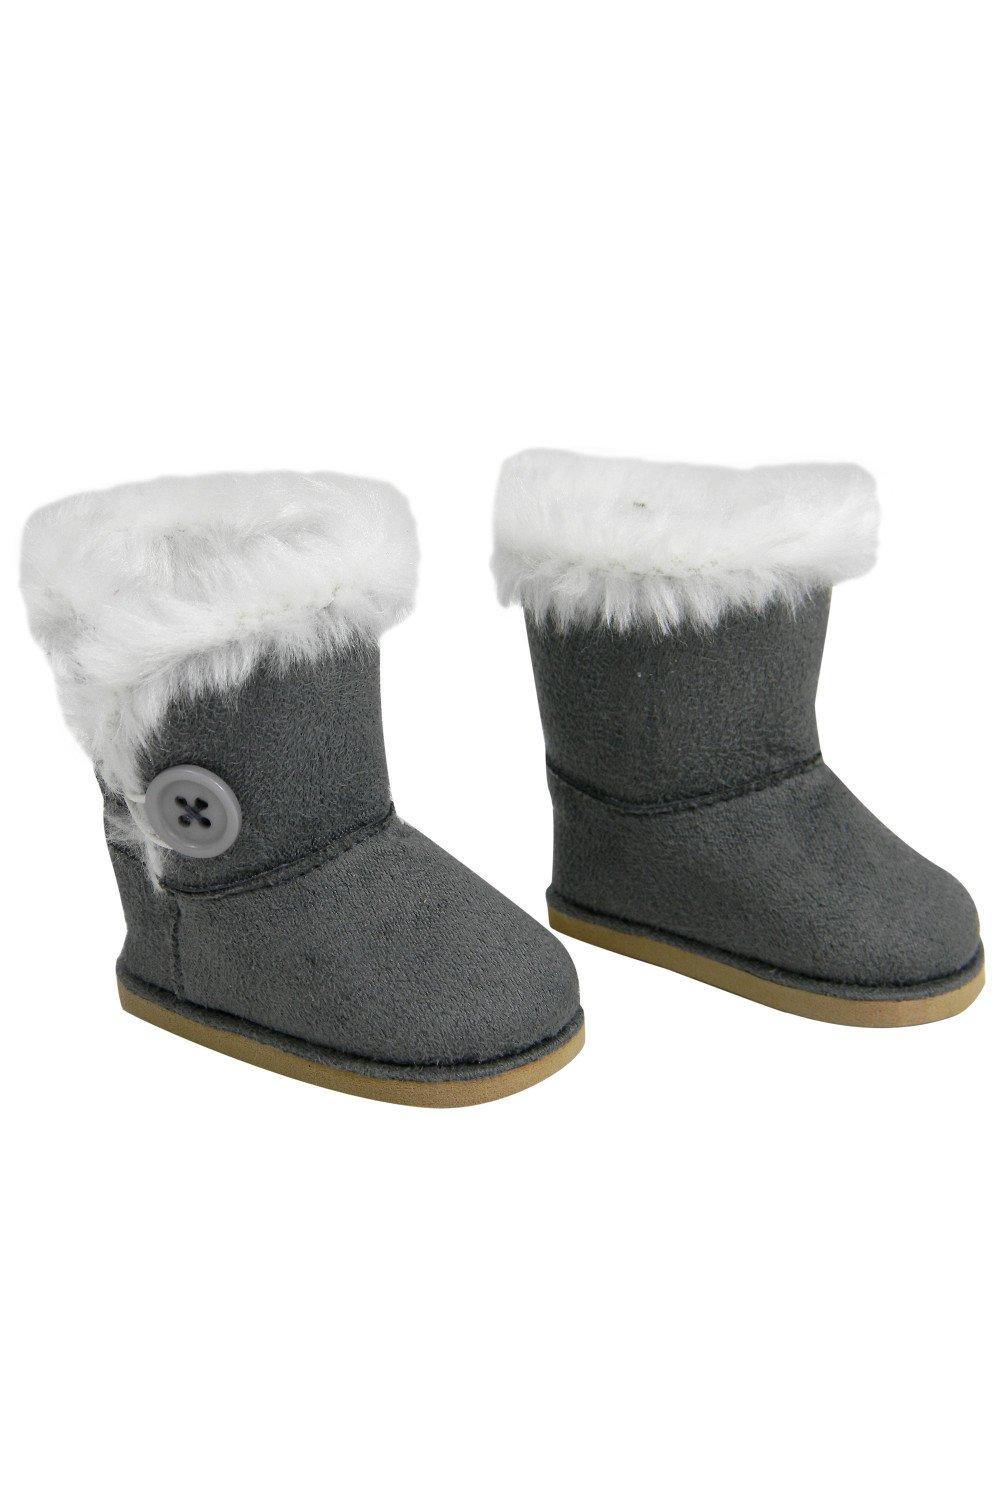 Sophia’s  18" Dolls Boots in Grey, Baby Doll Shoes